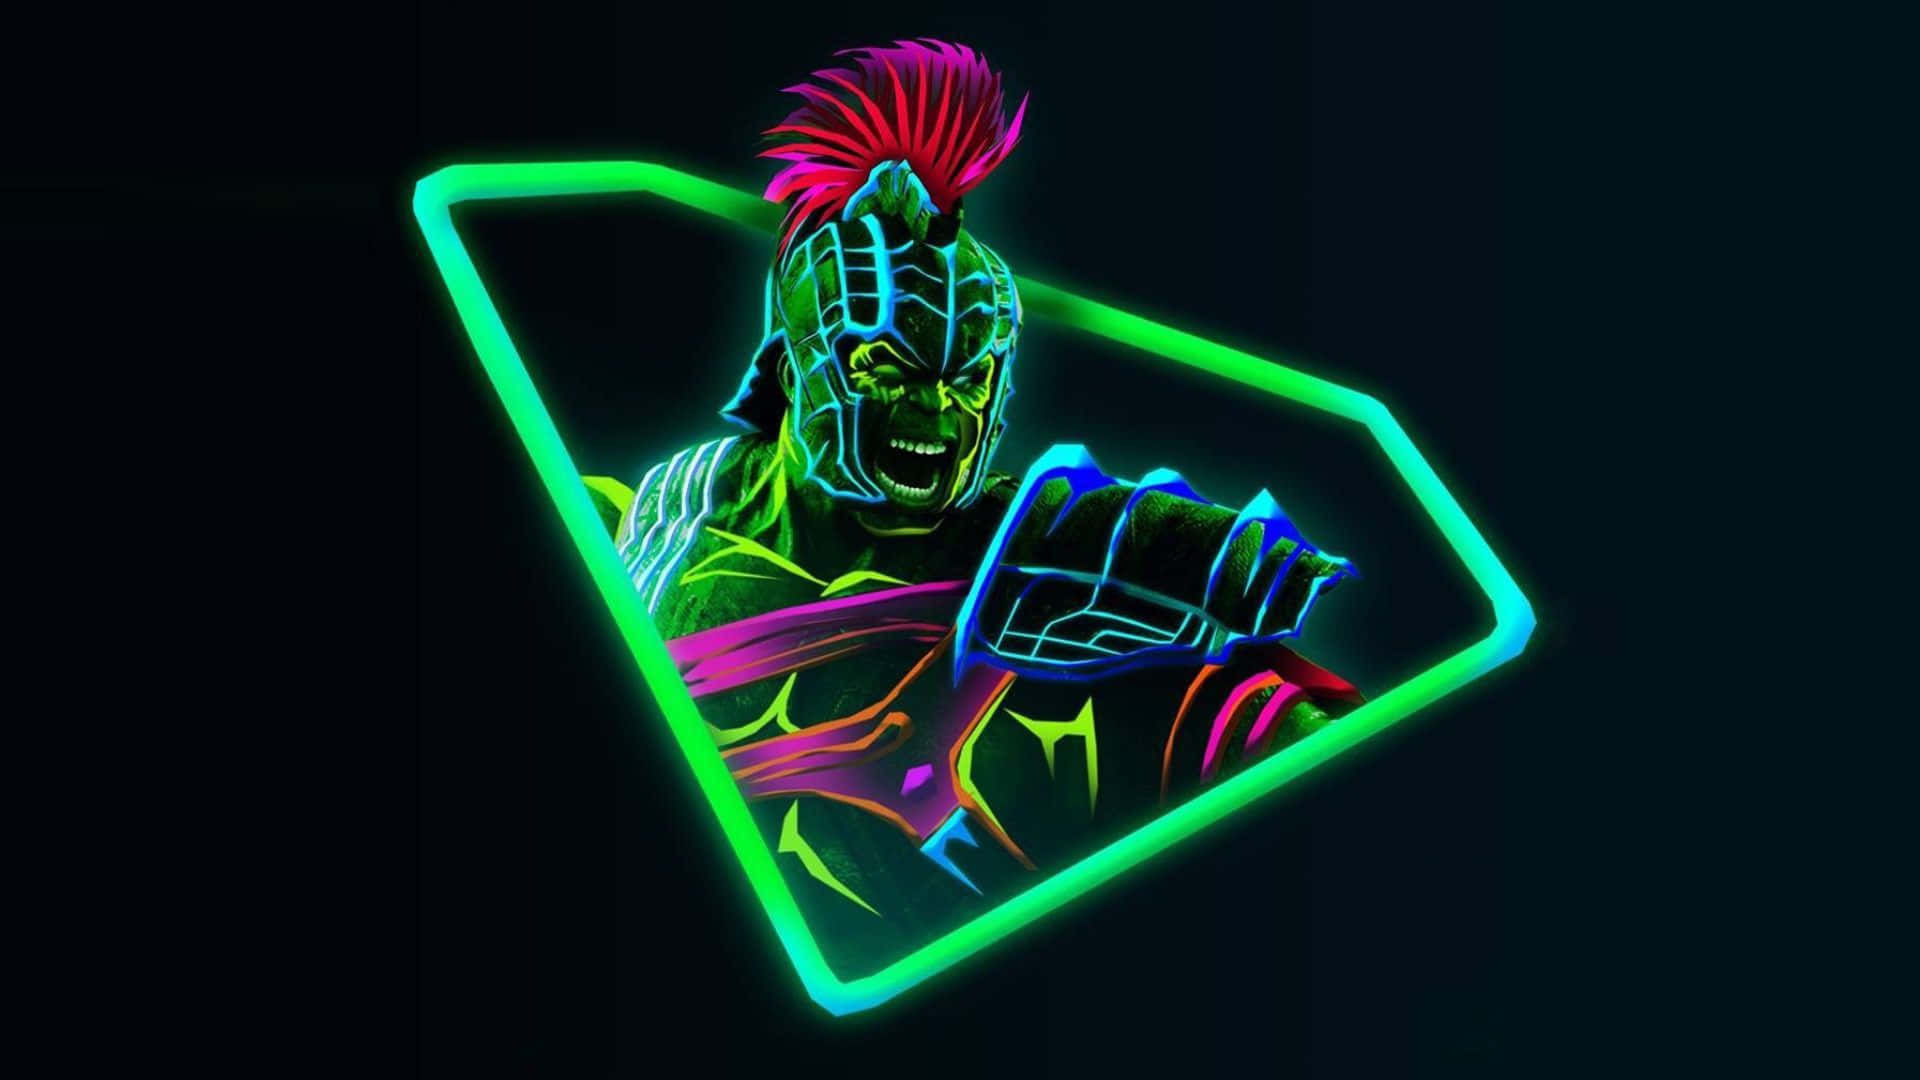 Find beauty amidst the neon lights Wallpaper